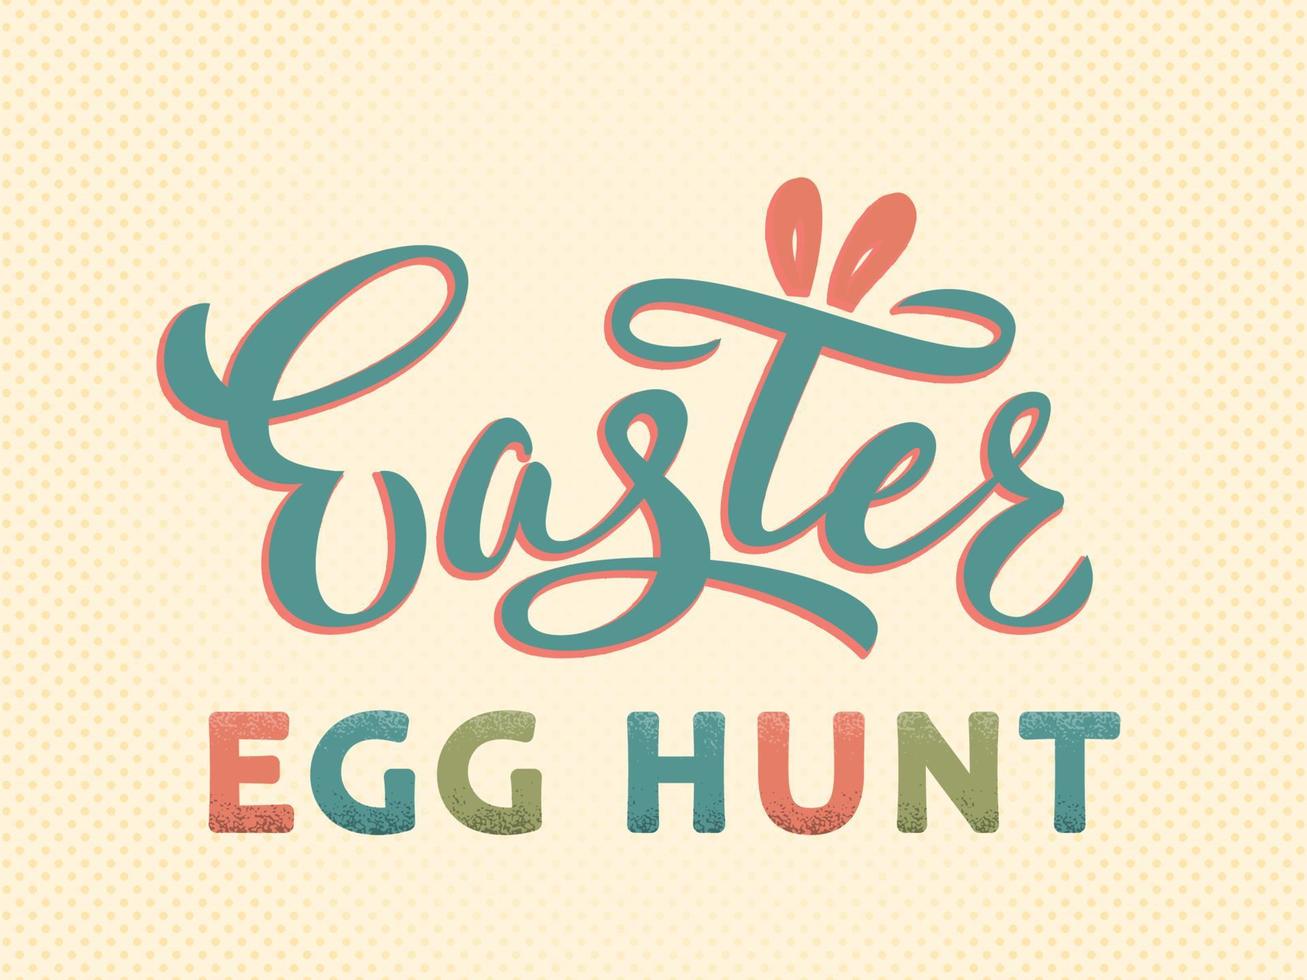 Easter egg hunt text hand lettering in vintage style. Easter sign with bunny ears. For Easter egg hunt logotype, badge, postcard, card, invitation, poster, banner, email vector